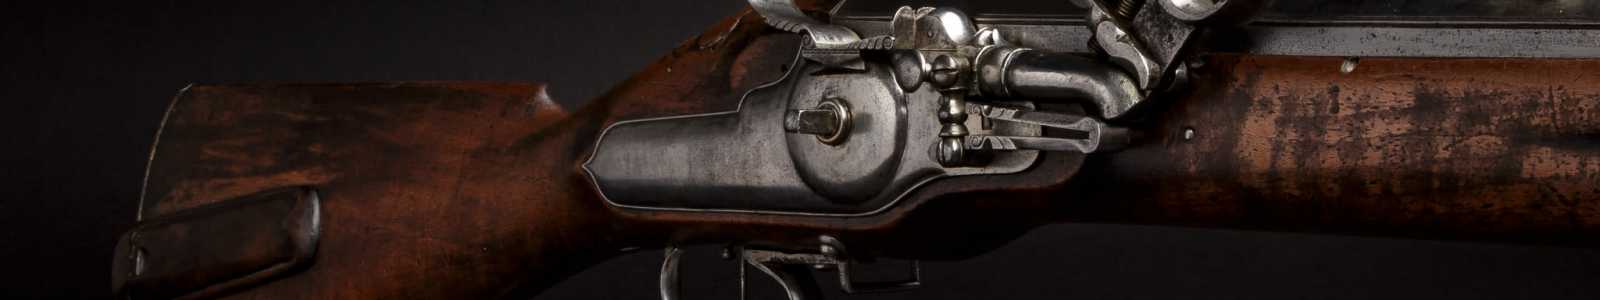 O88: Firearms from five centuries